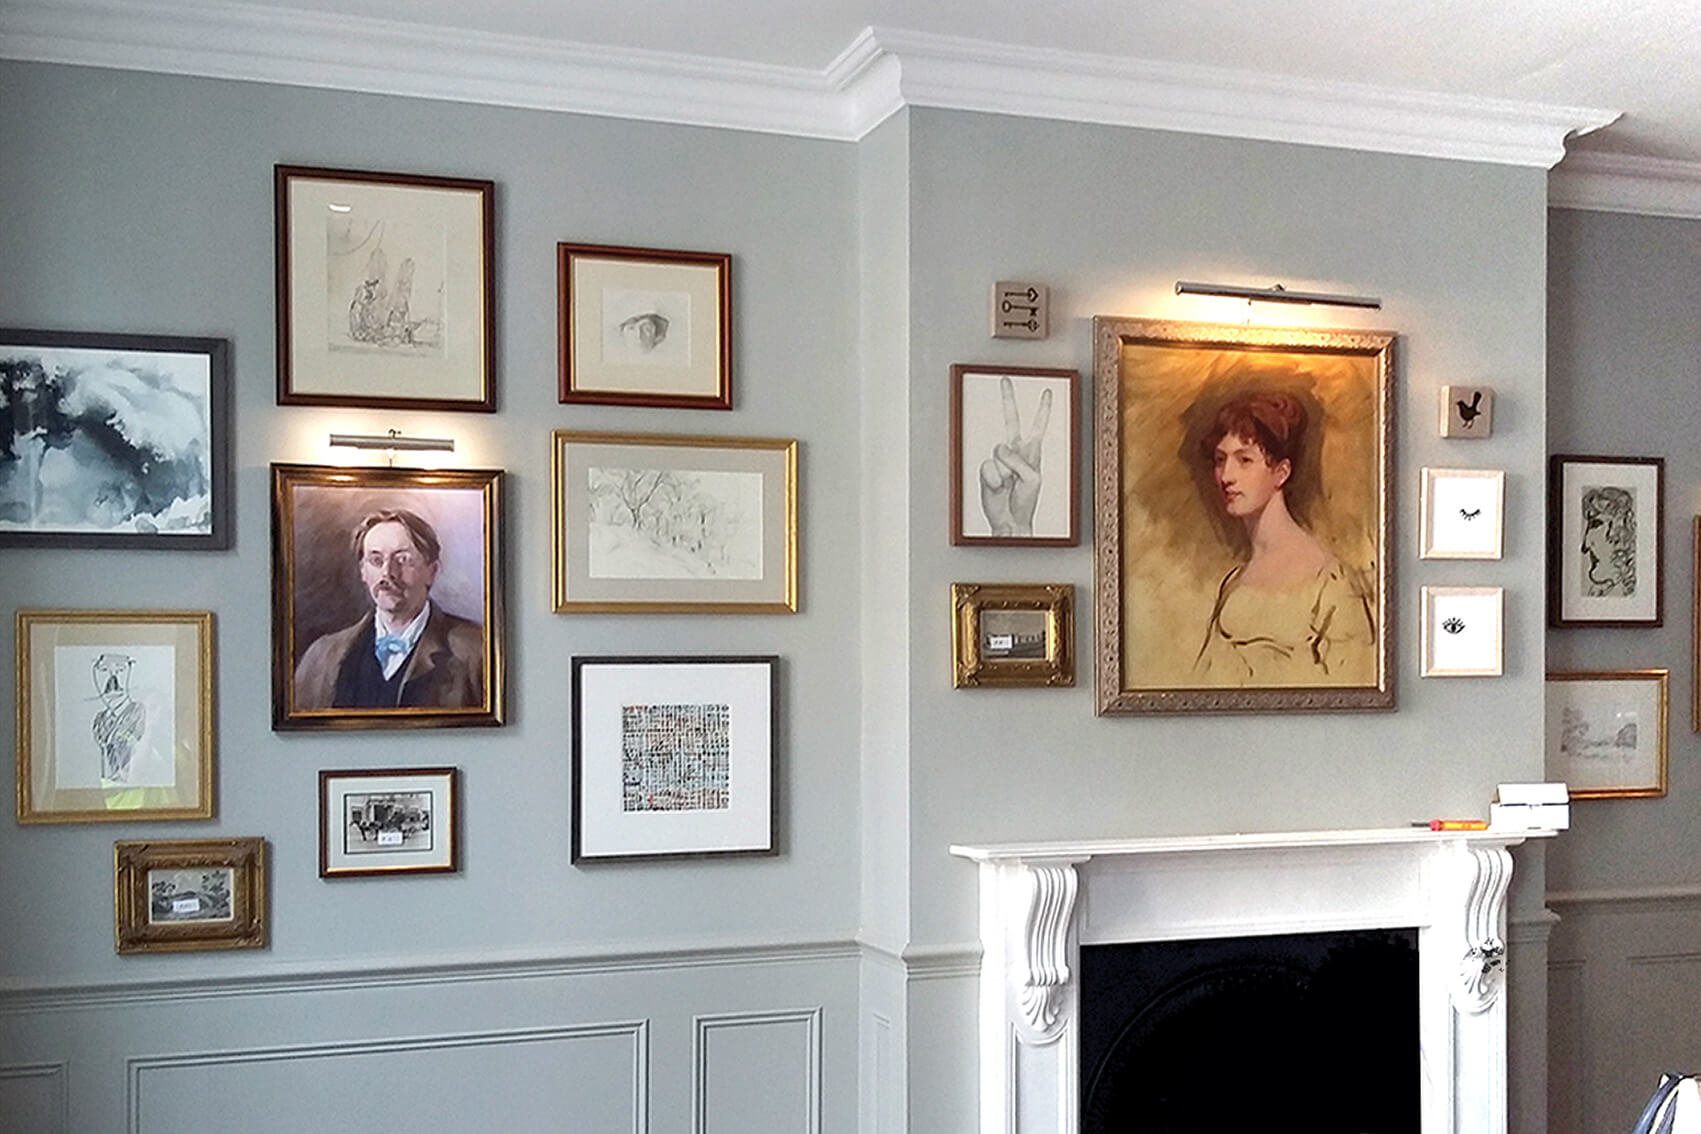 Beverley Arms Hotel, Yorkshire Dales, gallery wall, mixed art styles, traditional paintings, traditional portraiture, contemporary illustrations, illustrations, paintings, framed artwork, framed art, interiors, interior design